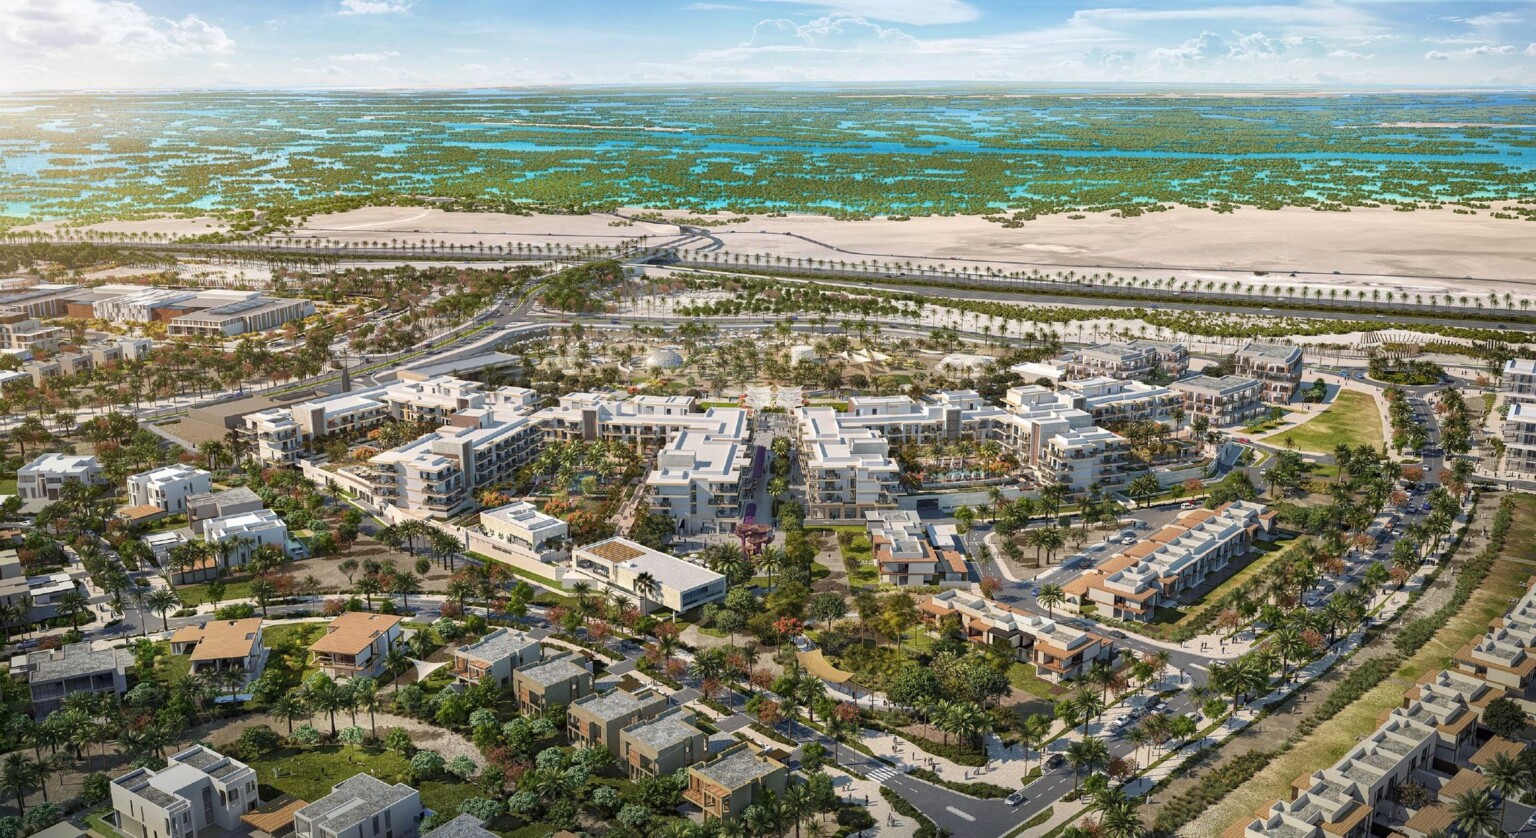 Aerial view of master plan, tall buildings curve along center line of mixed-use development with views of the Persian Gulf water